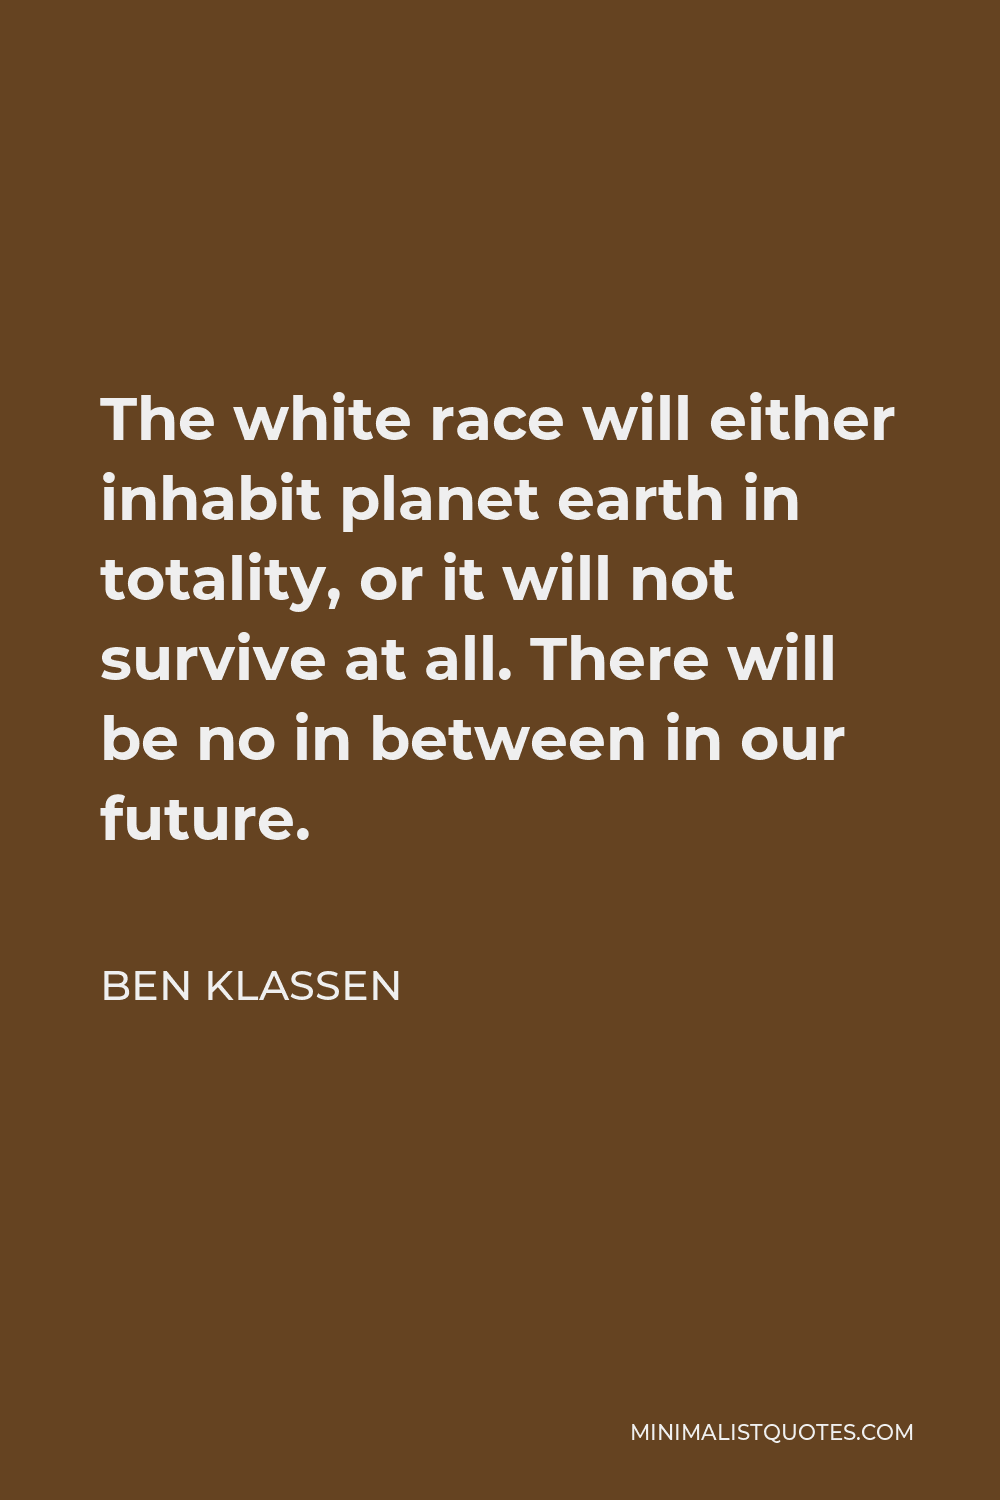 Ben Klassen Quote - The white race will either inhabit planet earth in totality, or it will not survive at all. There will be no in between in our future.